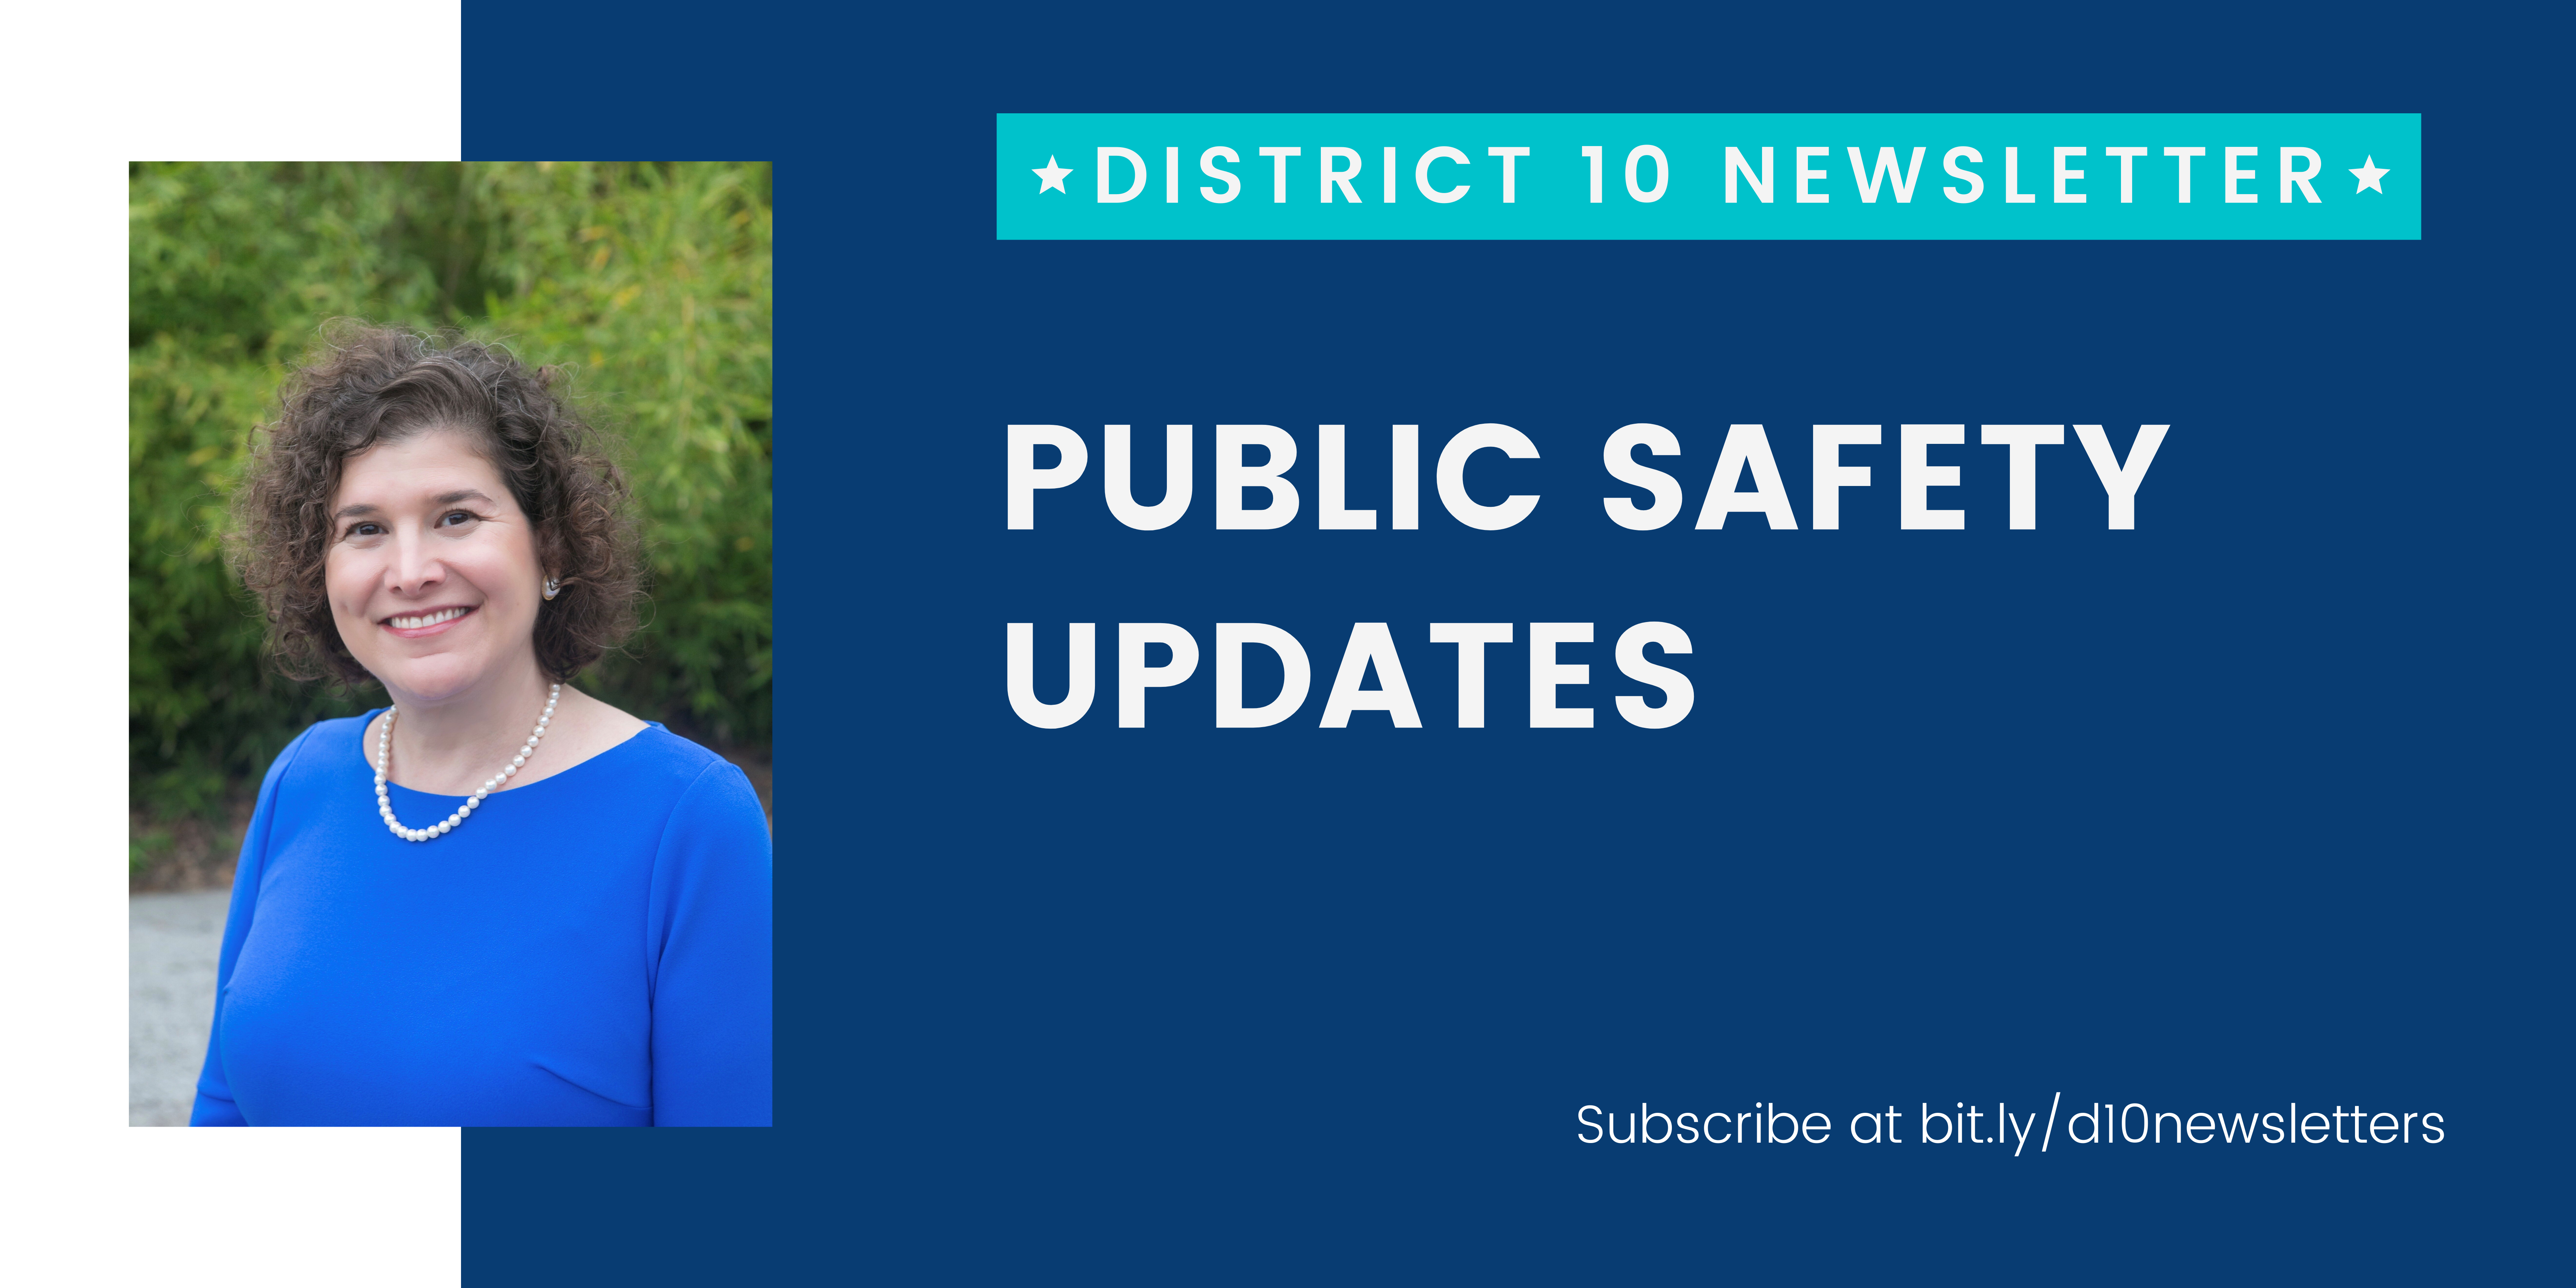 District 10 Newsletter; Public Safety Updates. Subscribe at bit.ly/d10newsletters